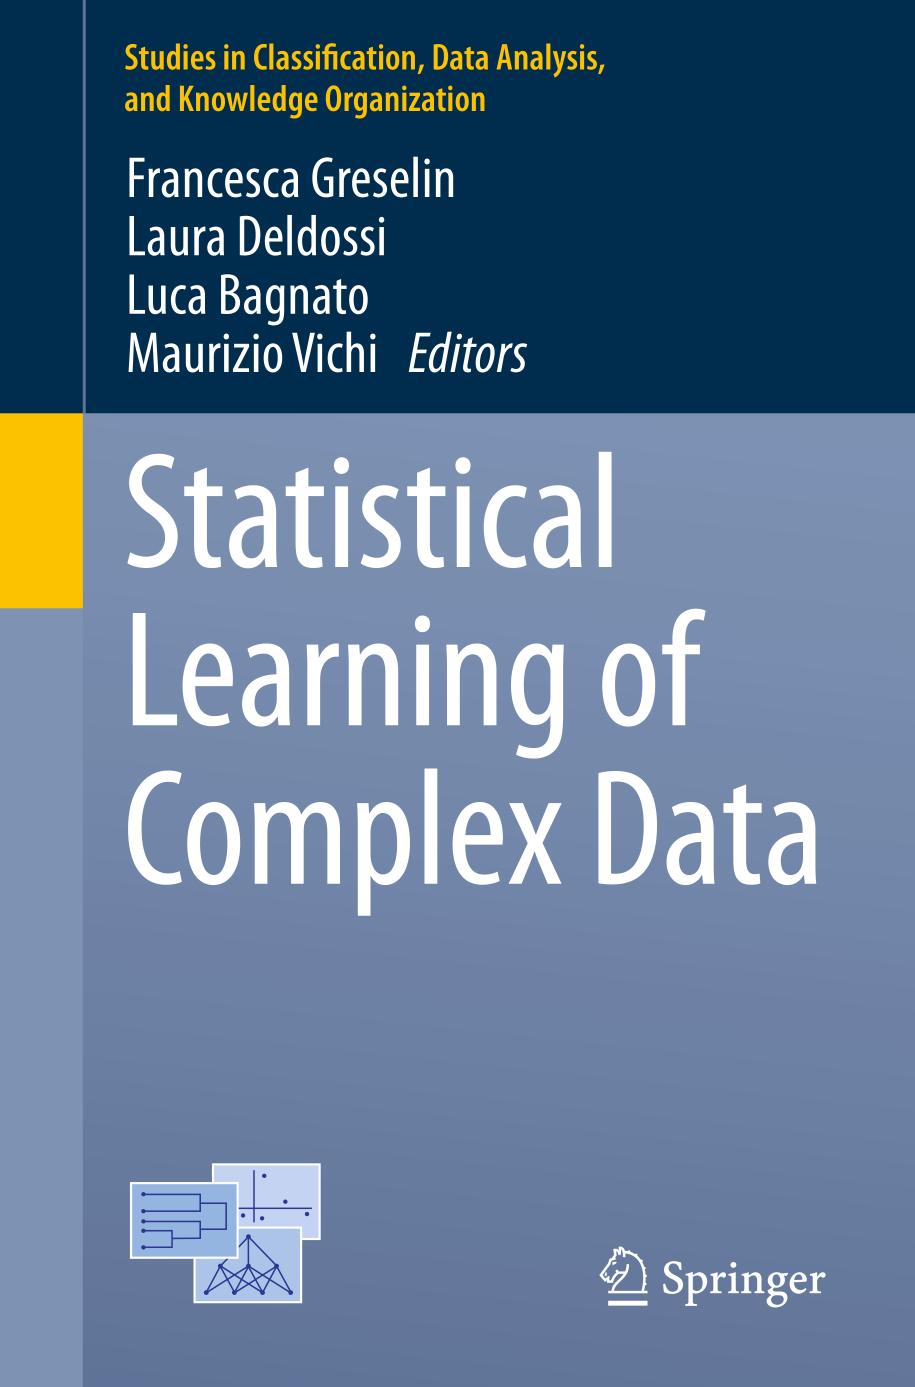 Statistical learning of complex data